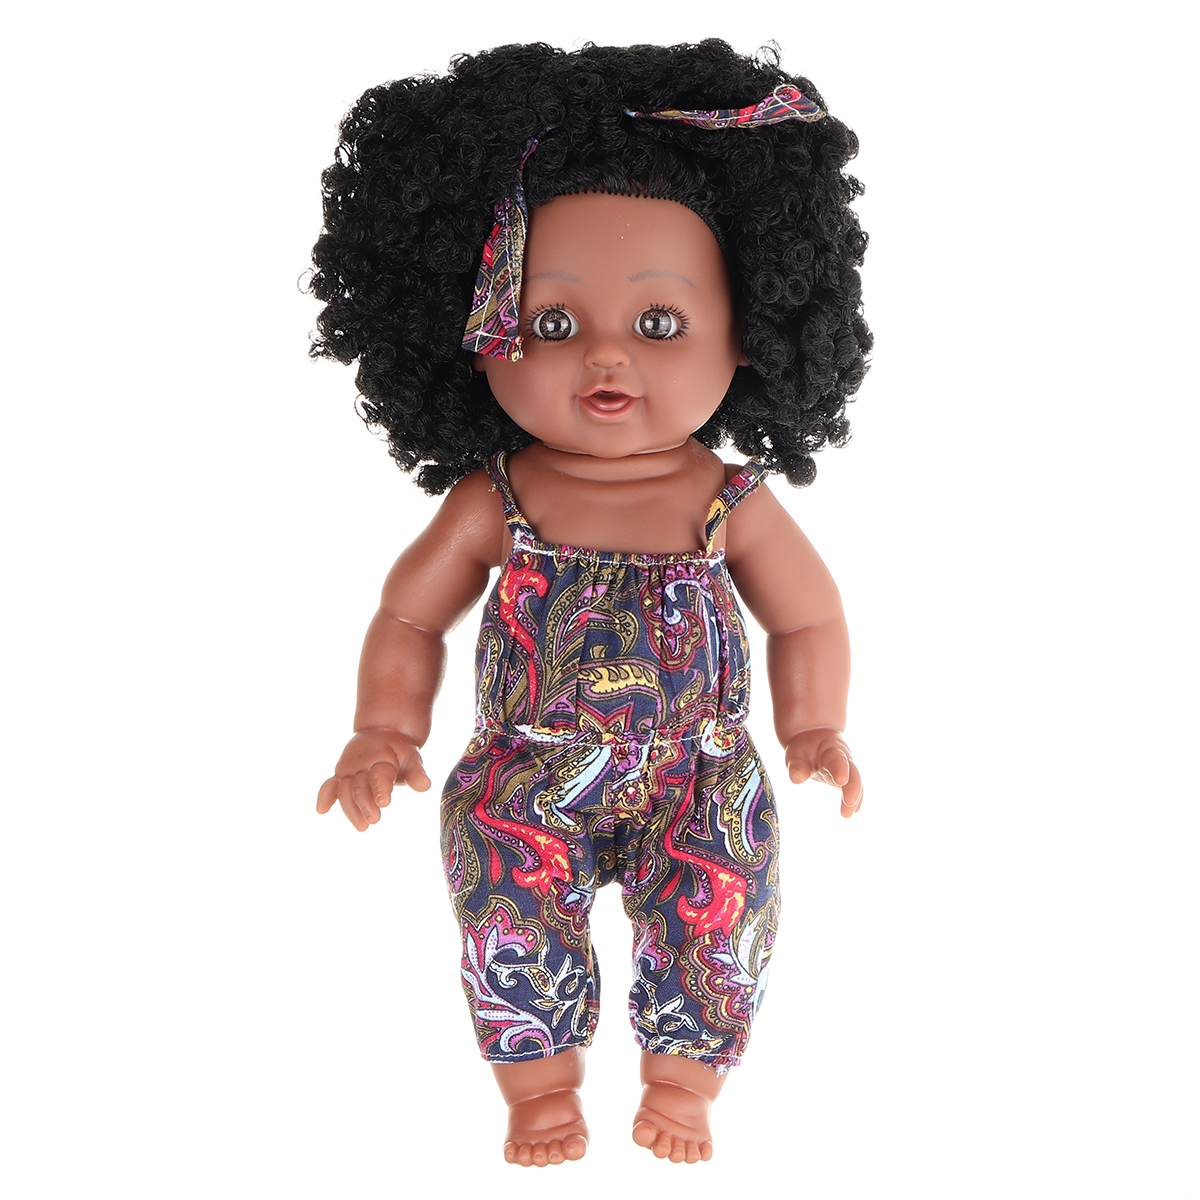 12Inch Soft Silicone Vinyl PVC Black Baby Fashion Play Doll Rotate 360° African Girl Perfect Reborn Doll Toy for Birthday Gift